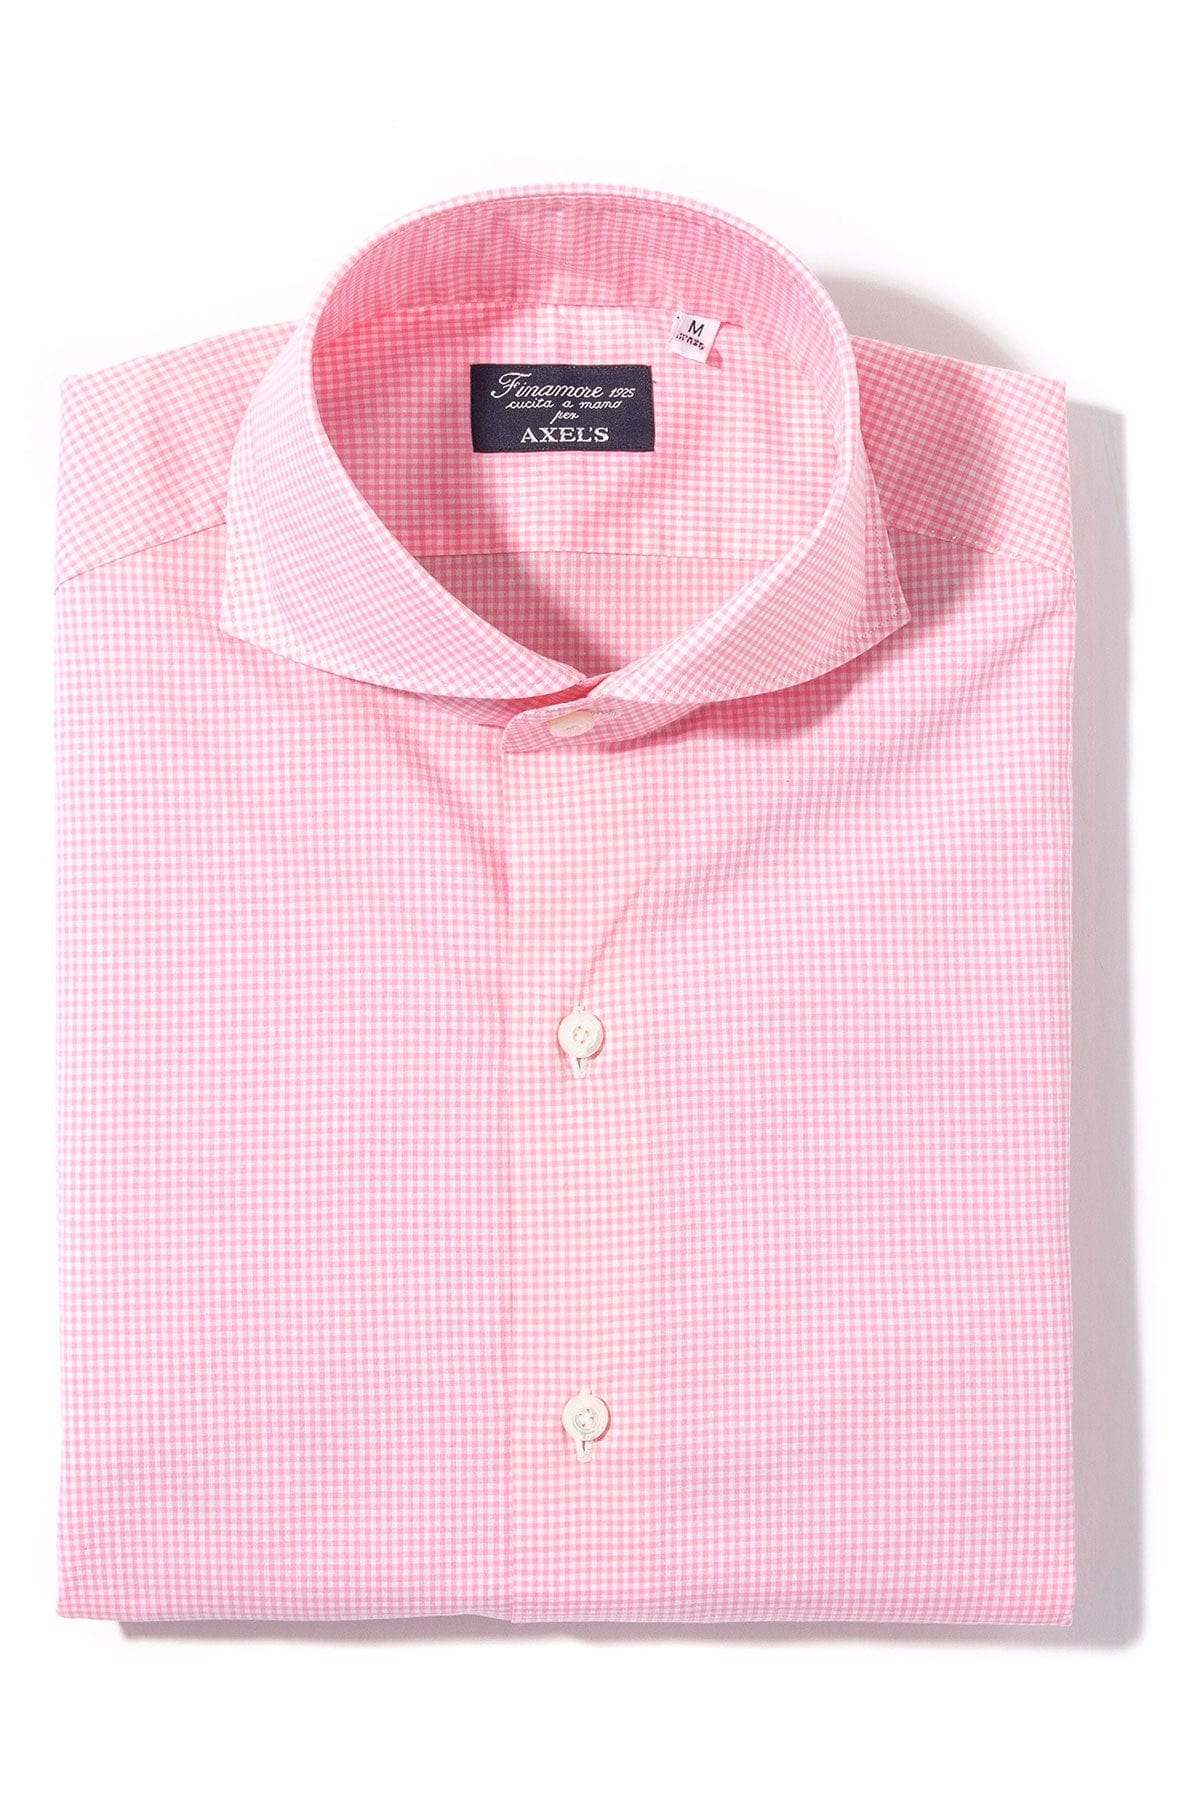 Petzen Small Checked Cotton Shirt In Pink - AXEL'S